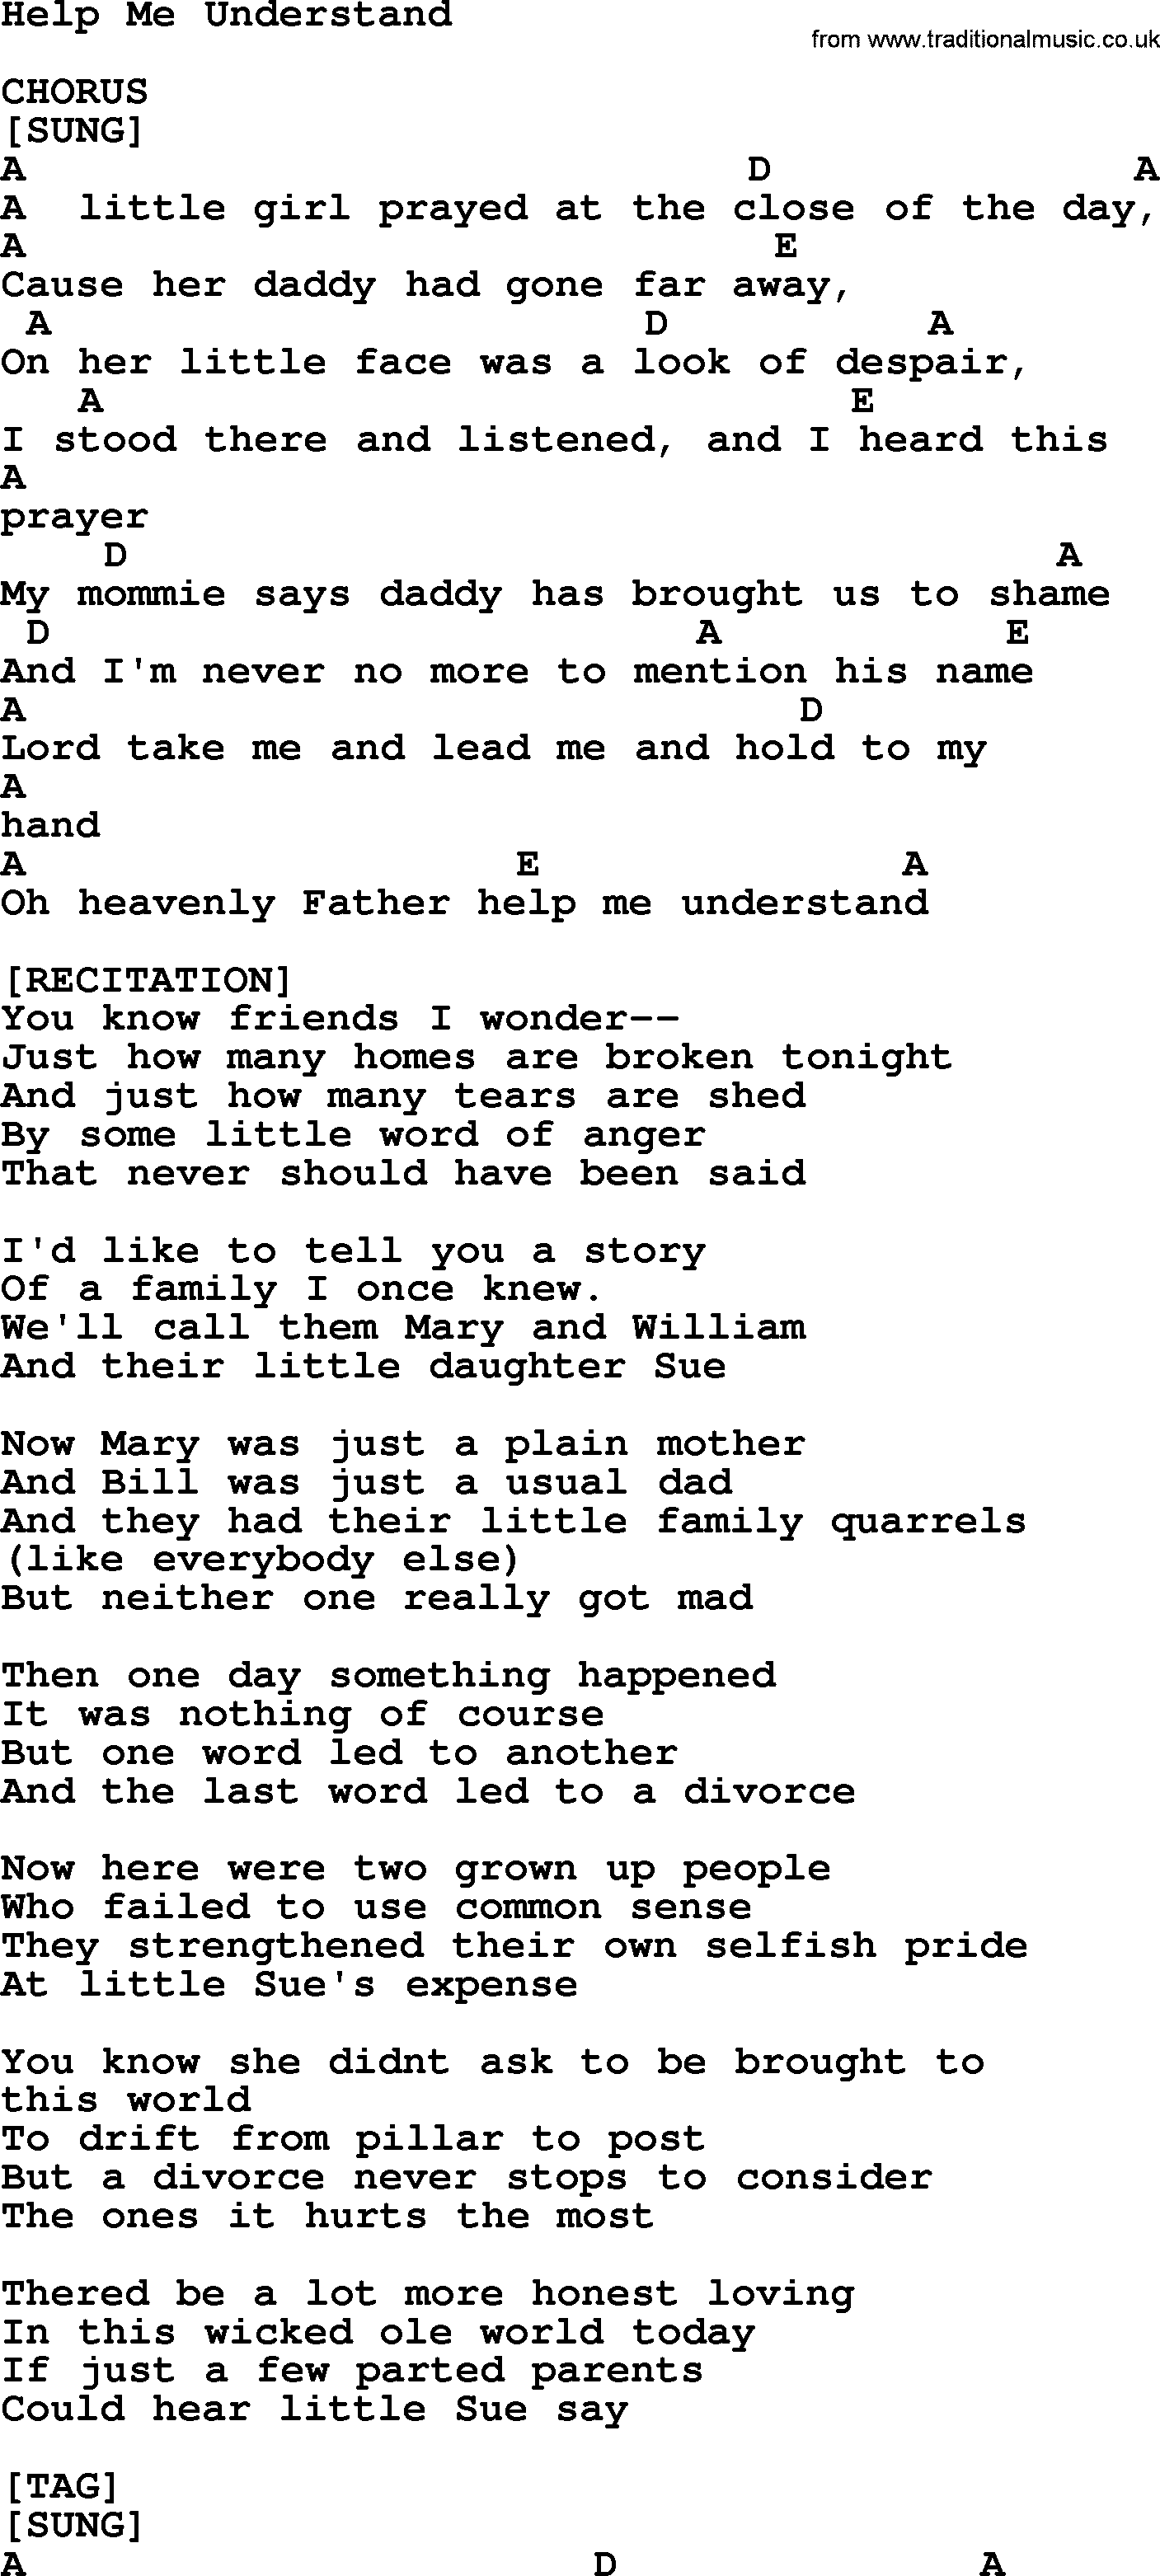 Hank Williams song Help Me Understand, lyrics and chords